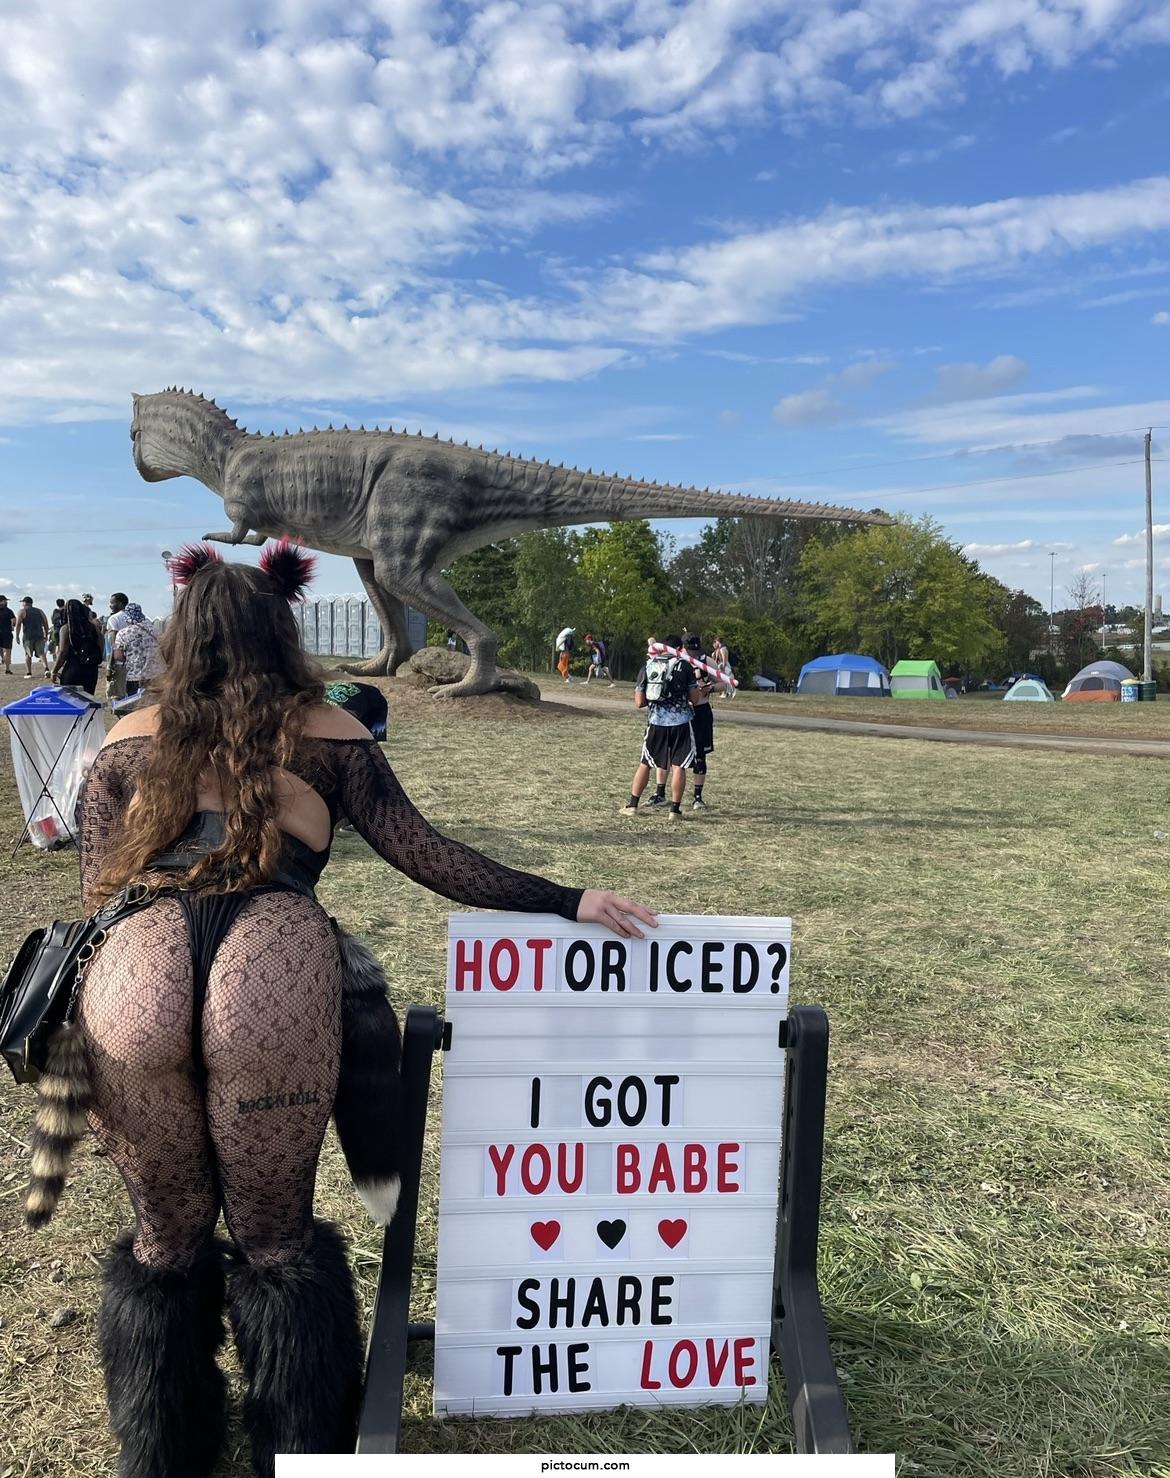 When a bikini barista goes to lost lands she has to get a pic with the coffee sign 😊😉